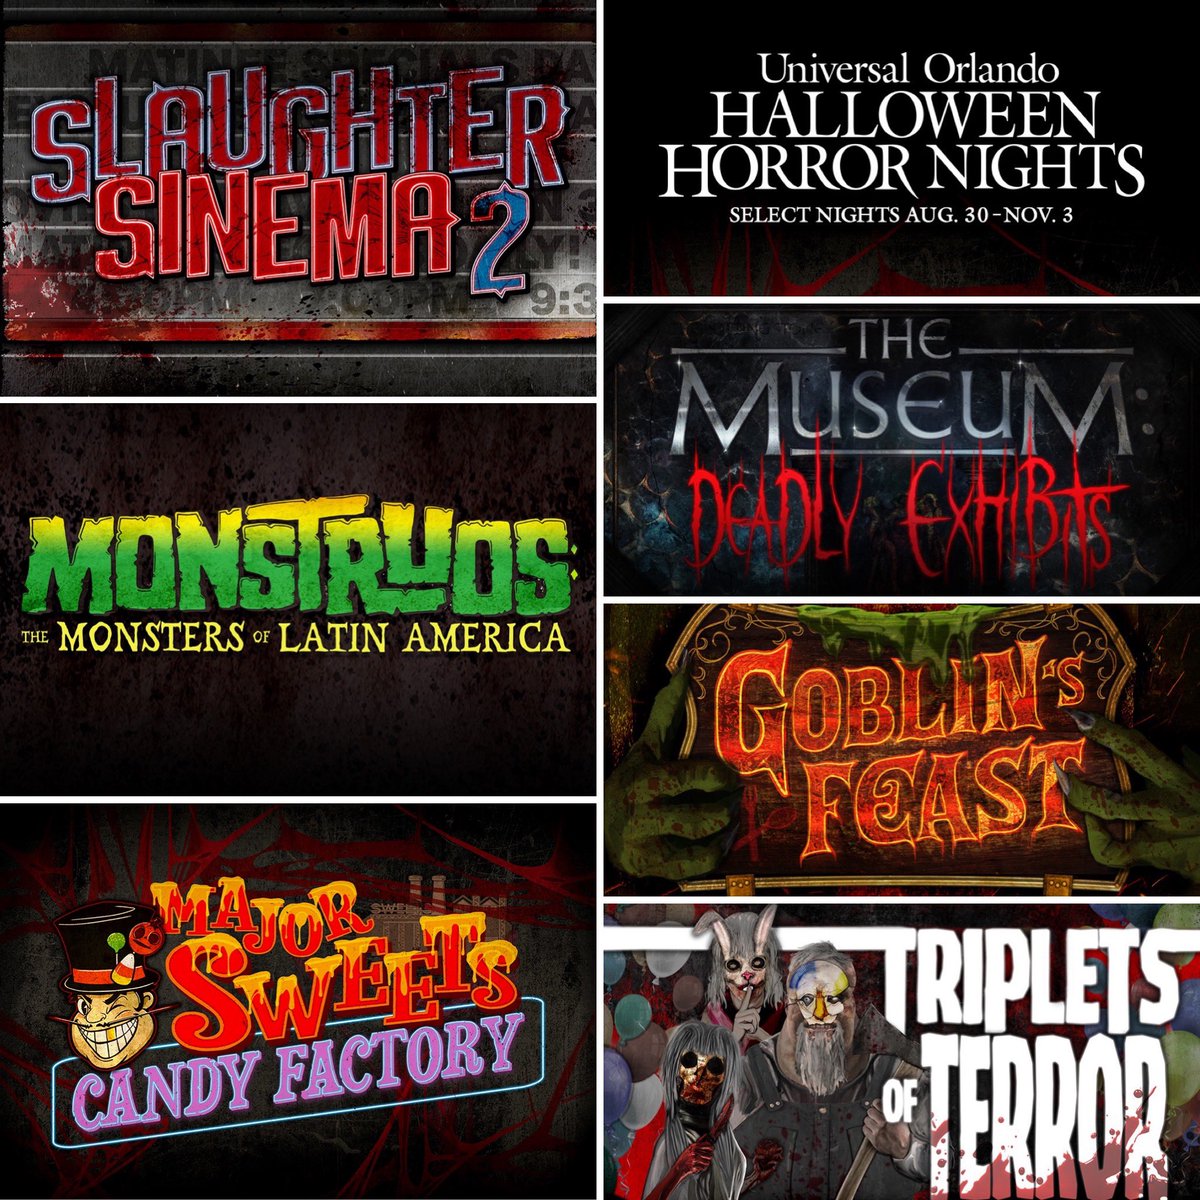 98 days left until the Opening Night of Horror Nights at Universal Orlando! This week @UniversalORL announced 6 new original haunted houses! 👻 🎃 @HorrorNightsORL #HHN33